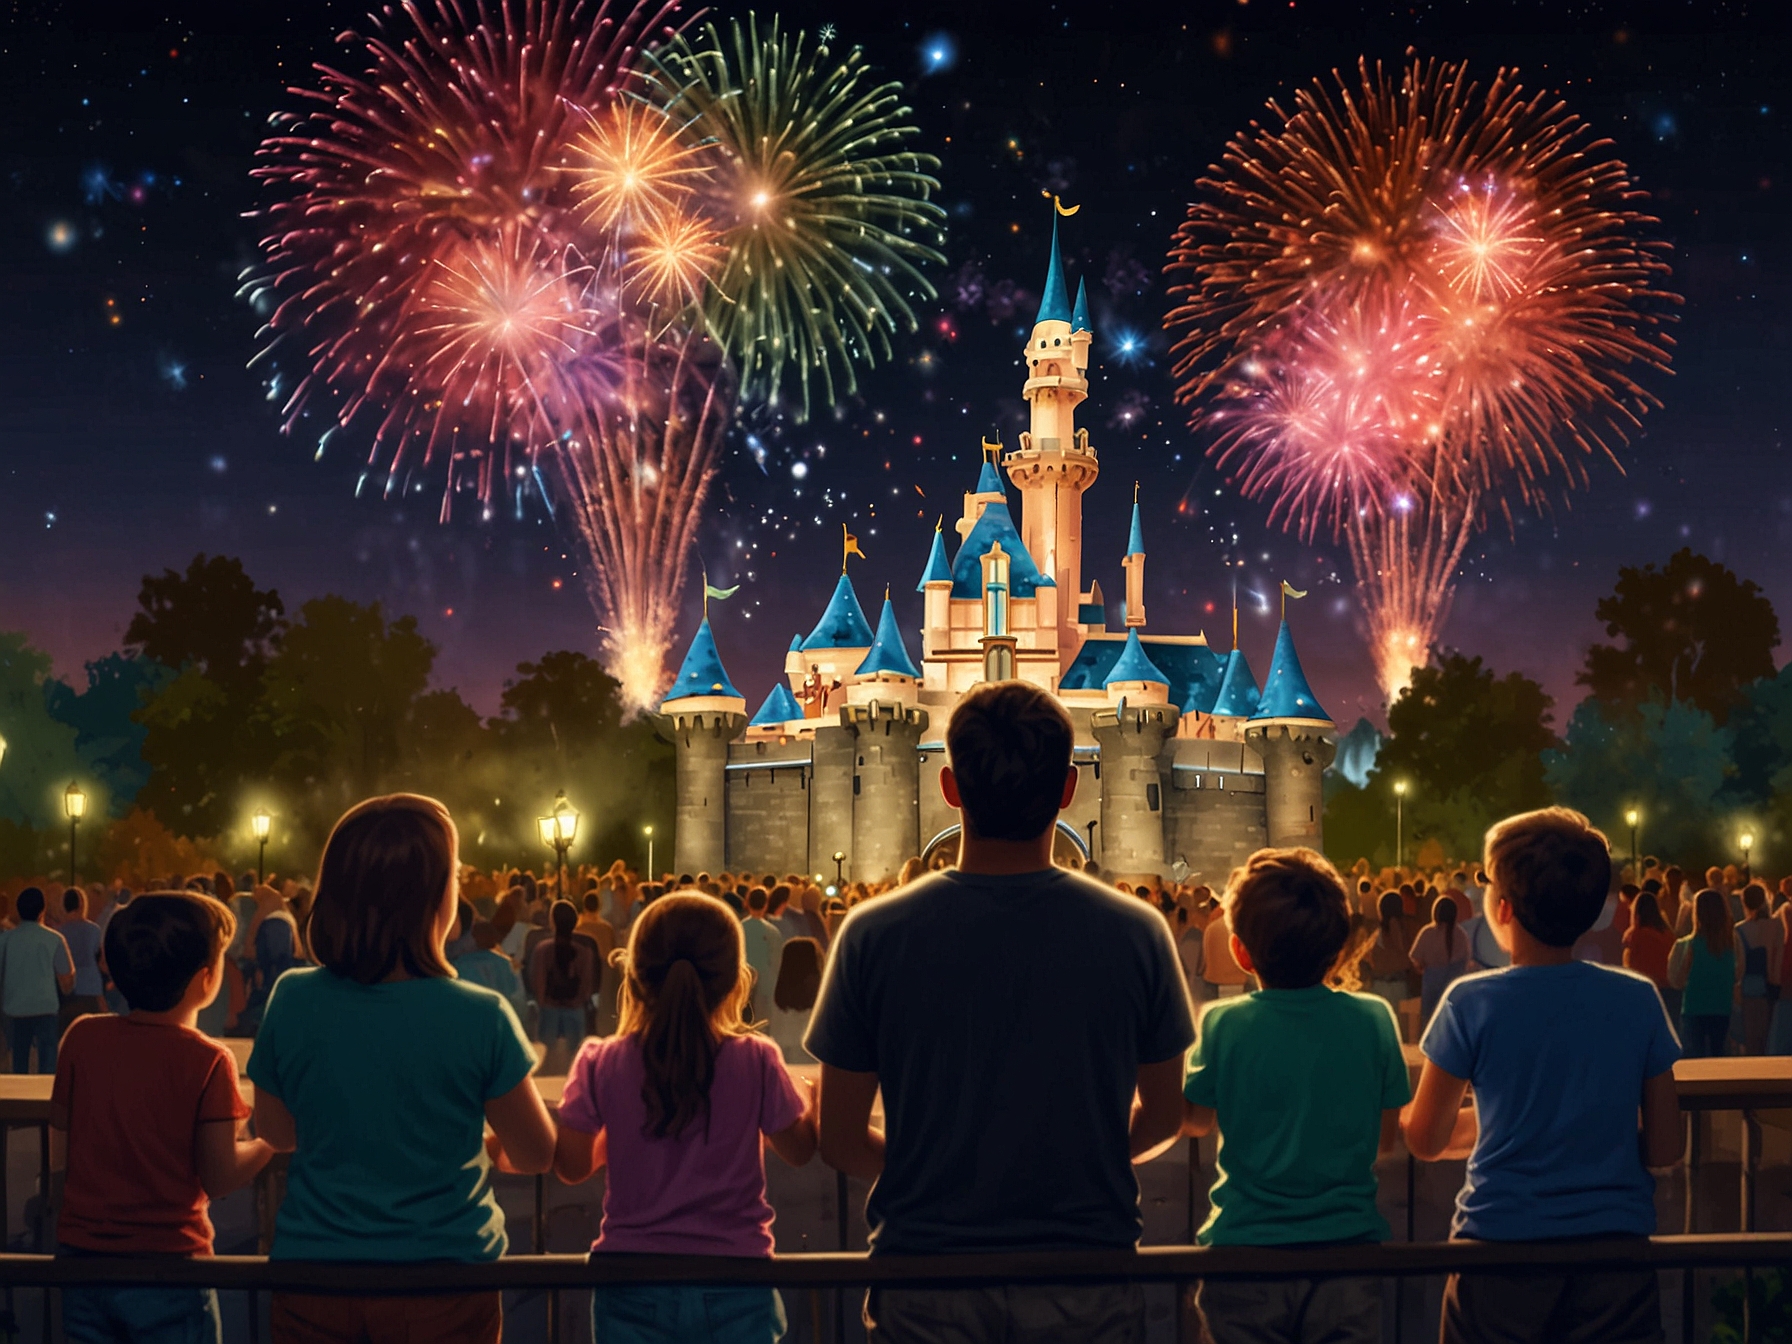 Families watching a dazzling fireworks show at Disneyland in Anaheim, with vibrant colors and perfectly synchronized music creating a magical Independence Day celebration.